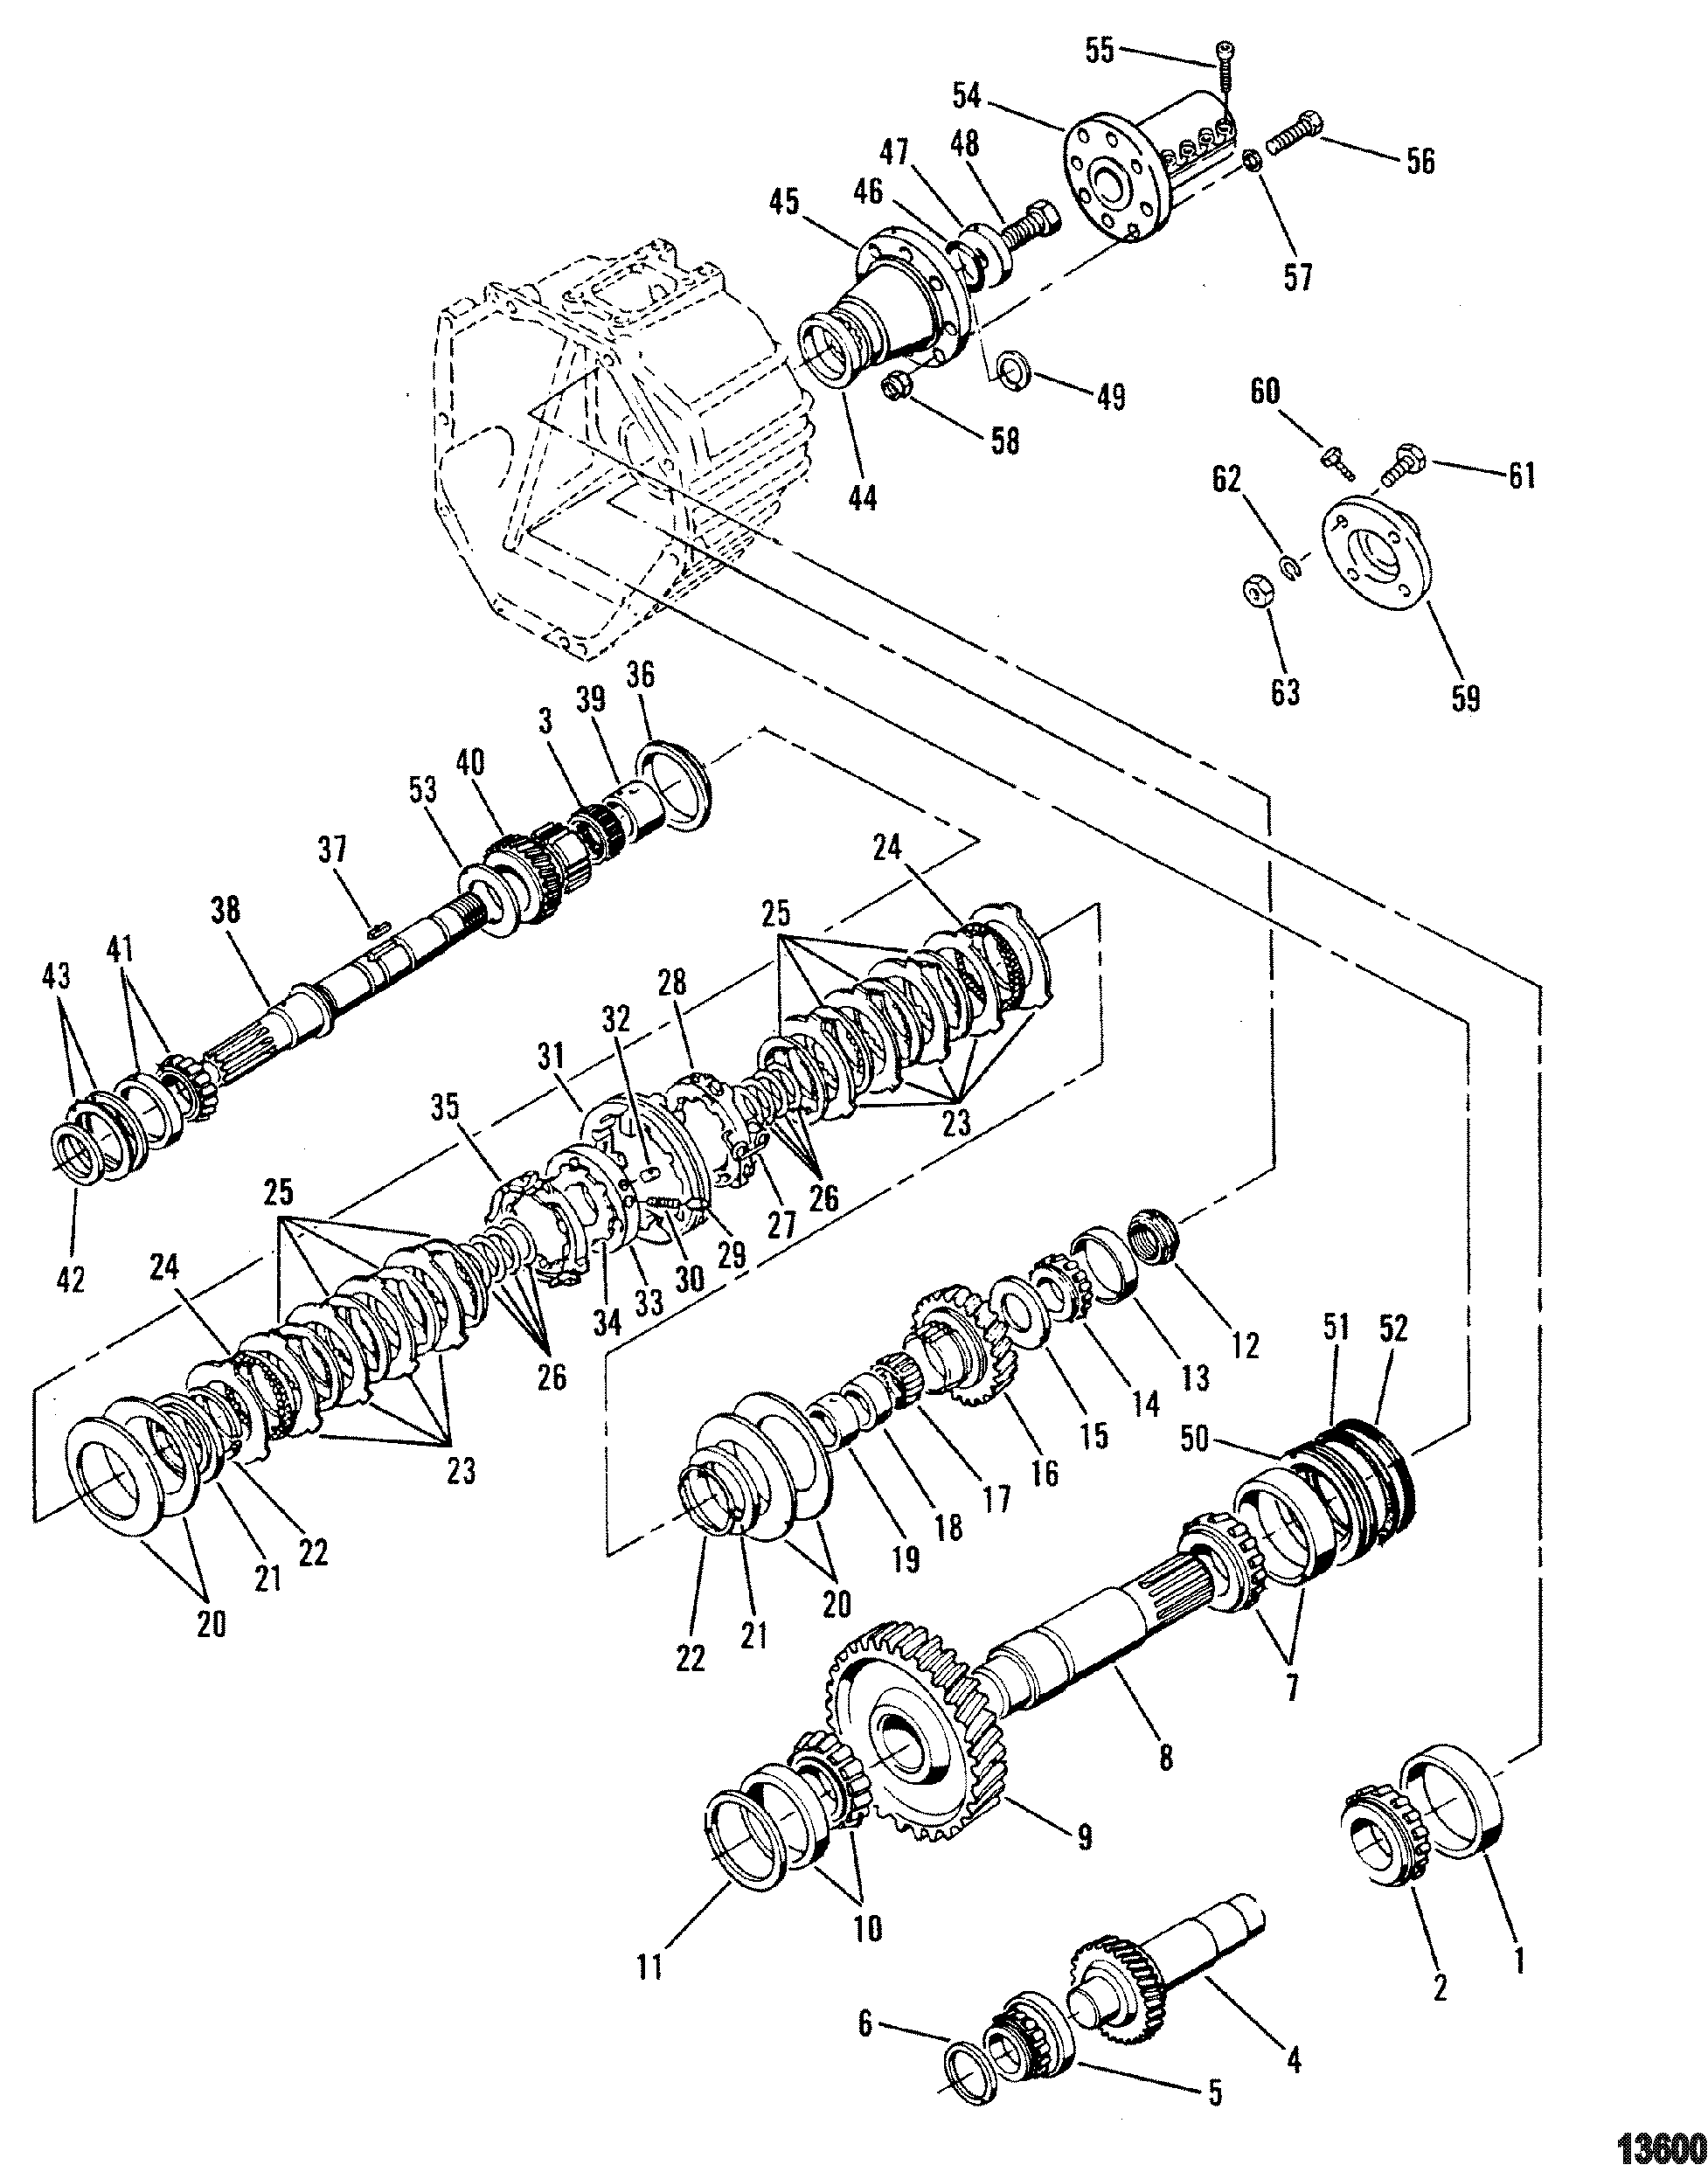 Transmission(8 Degree Down) (Internal Components)